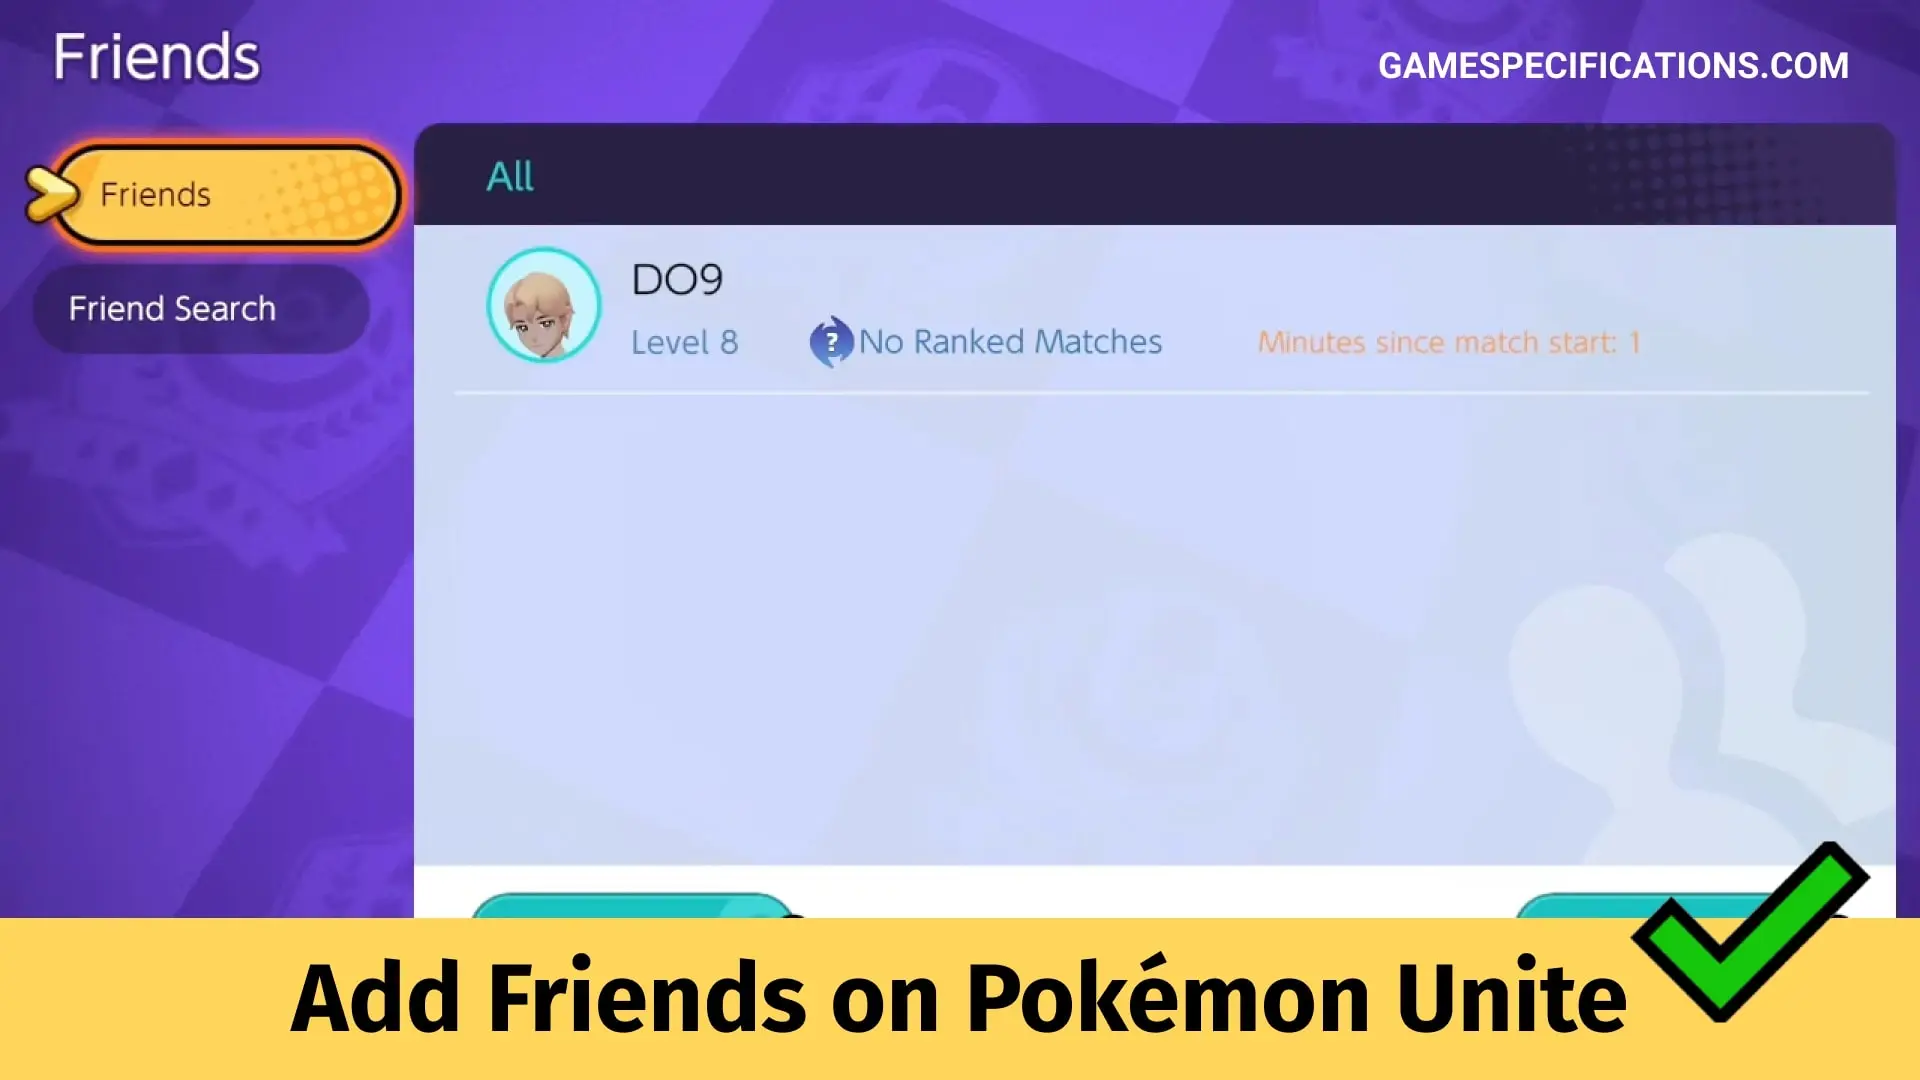 How To Add Friends On Pokémon Unite - Game Specifications